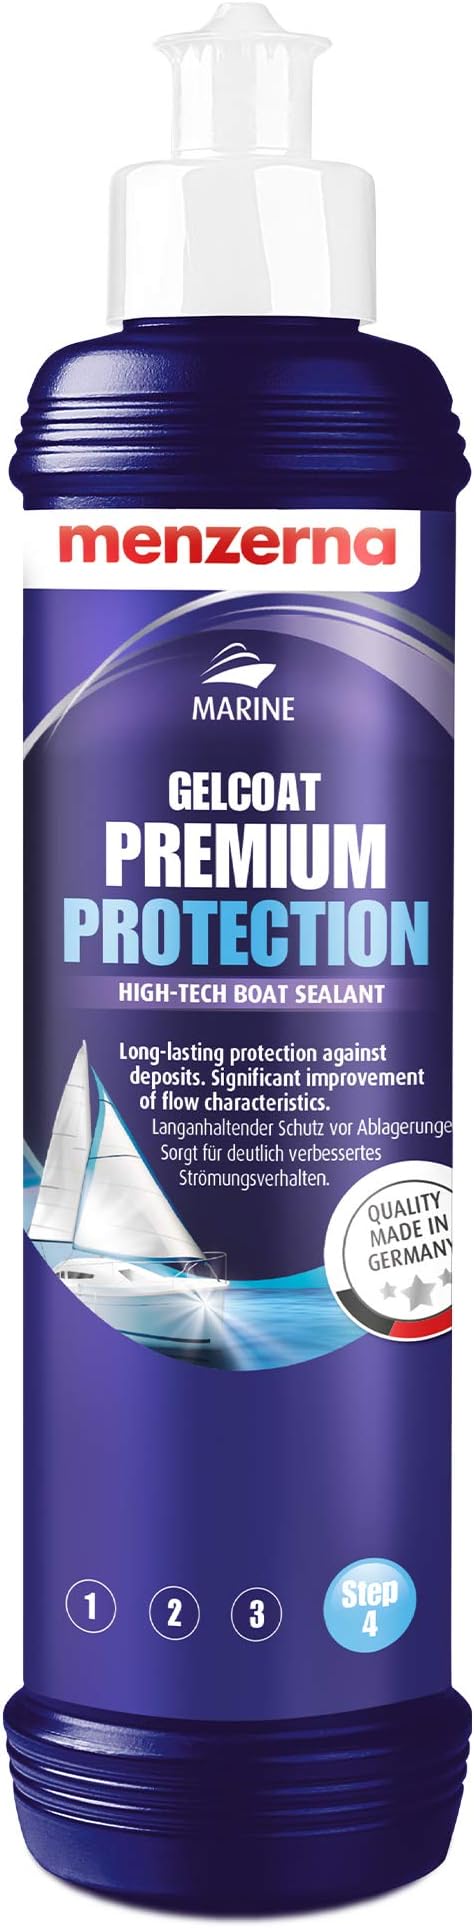 MENZERNA - Gelcoat Premium Protection (Protection for gelcoat)